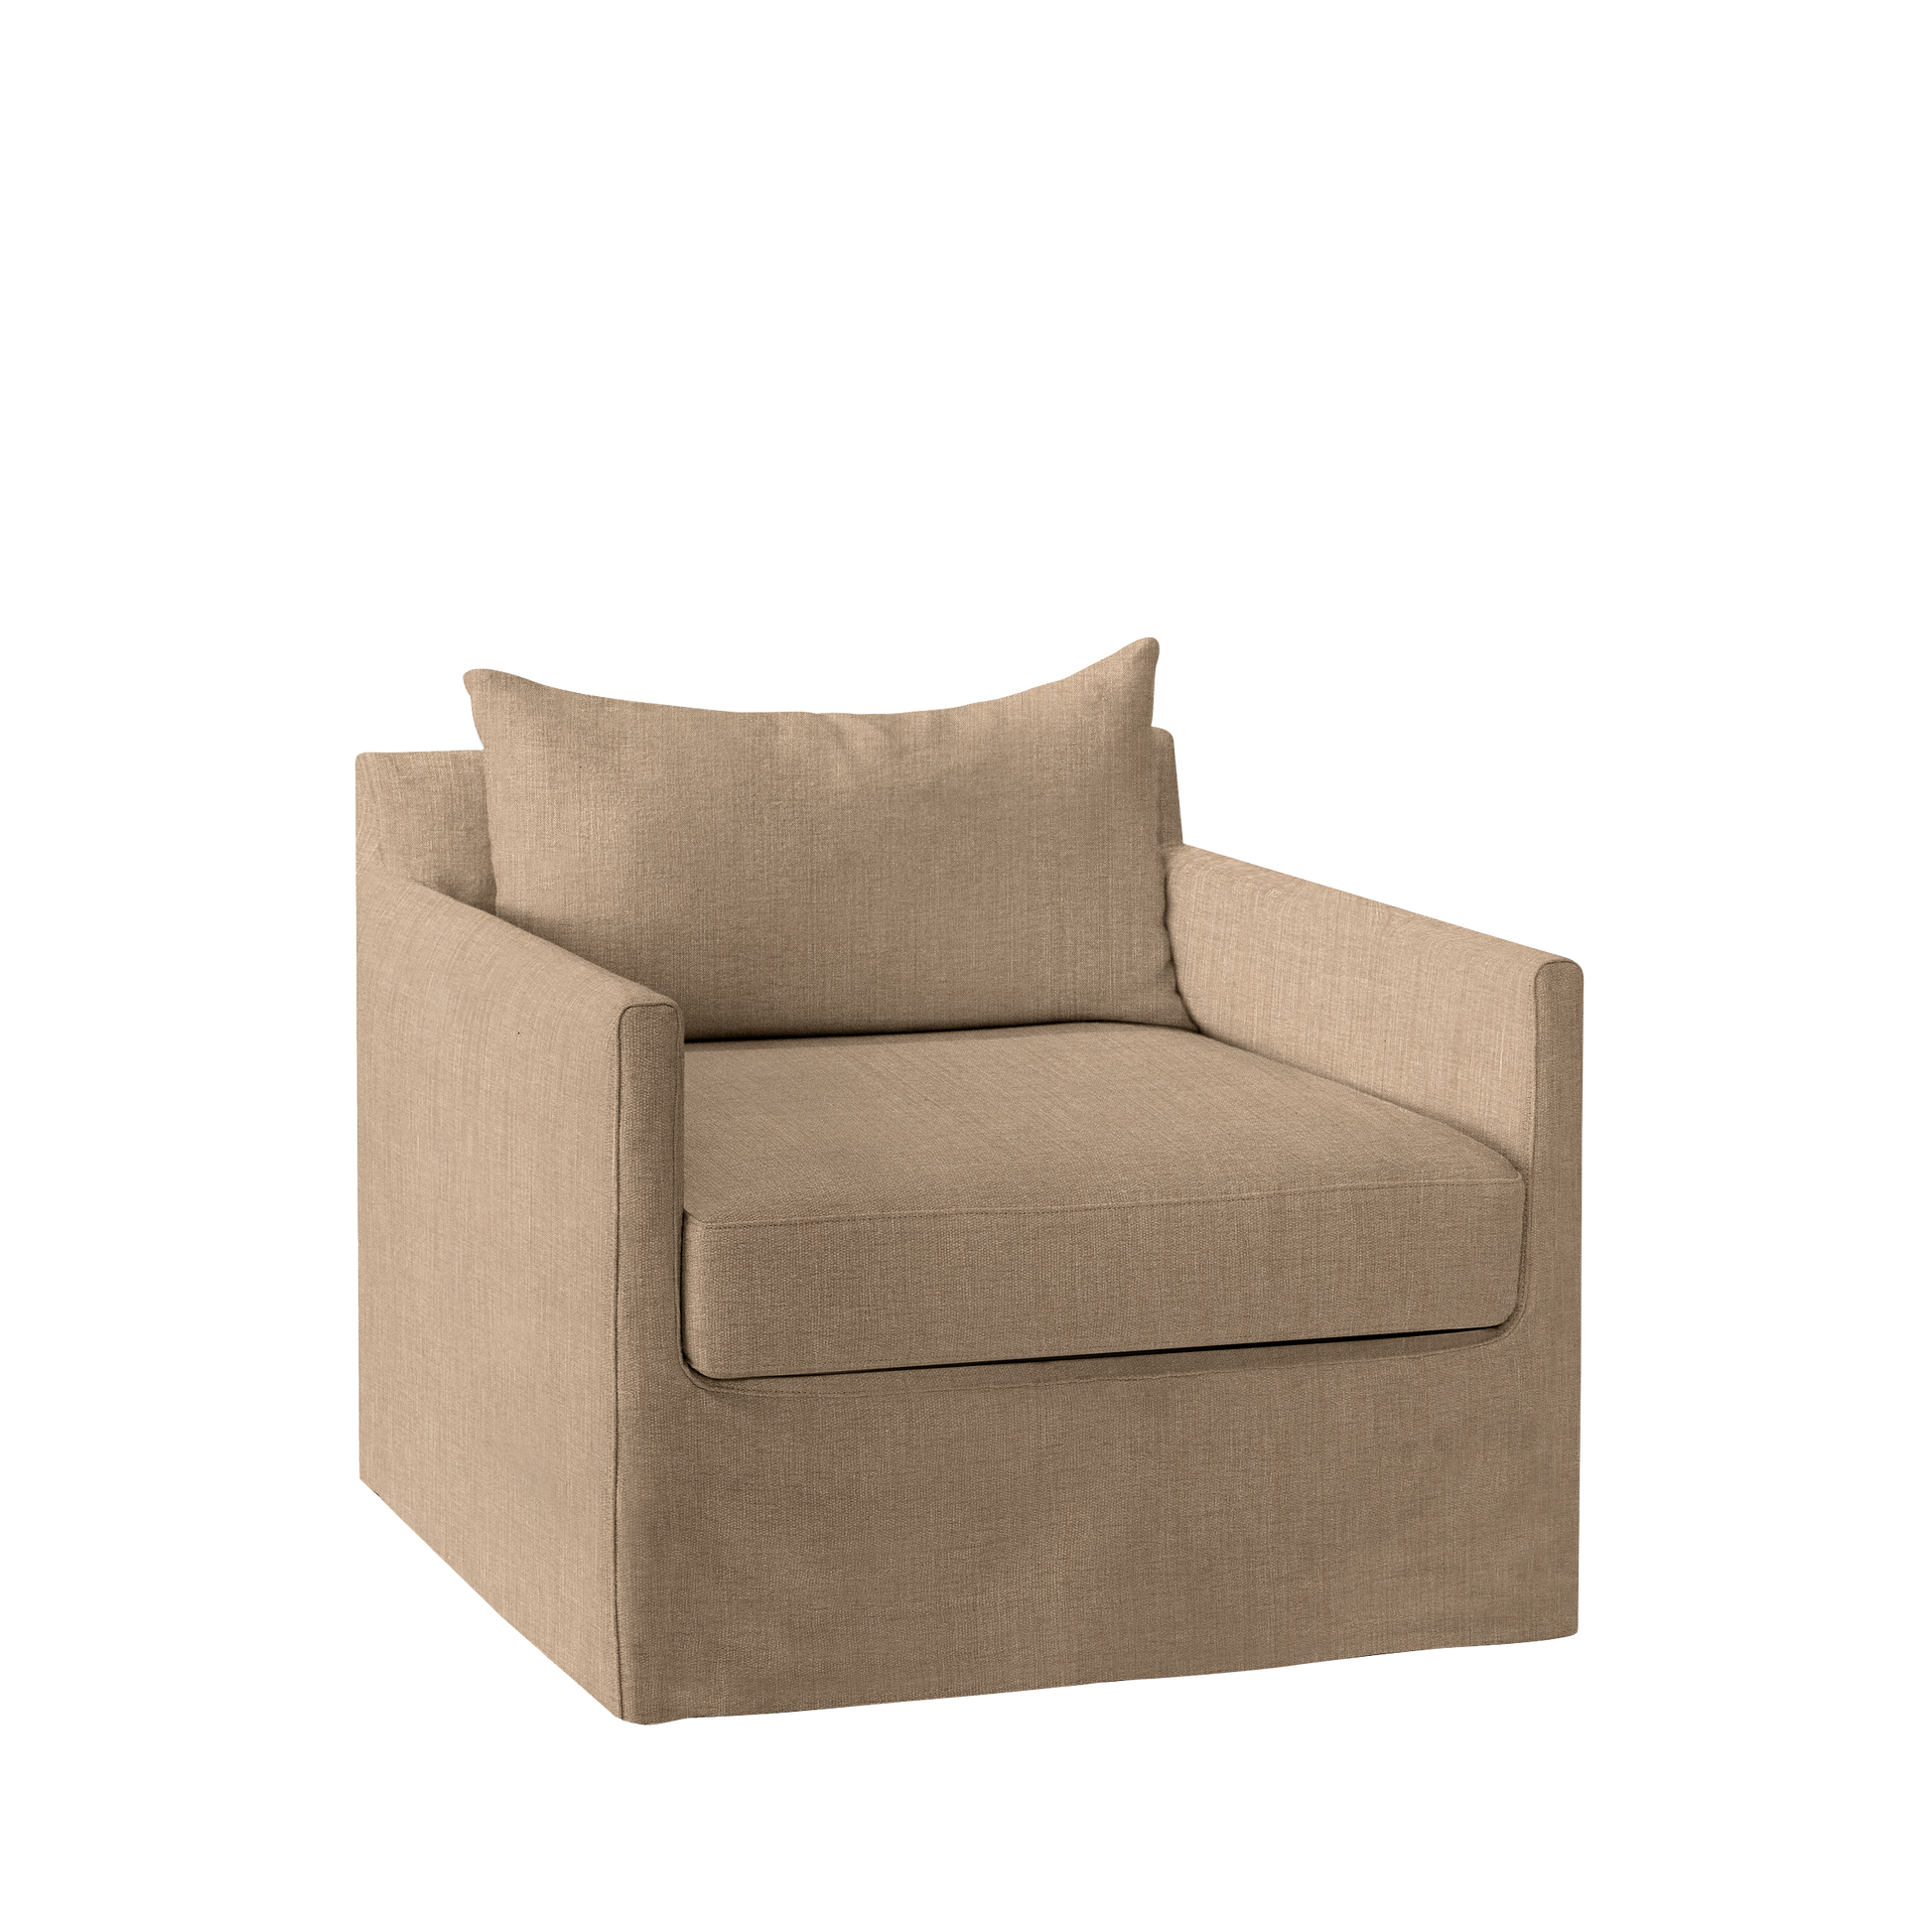 Extra wide Alba lounge chair with khaki textile